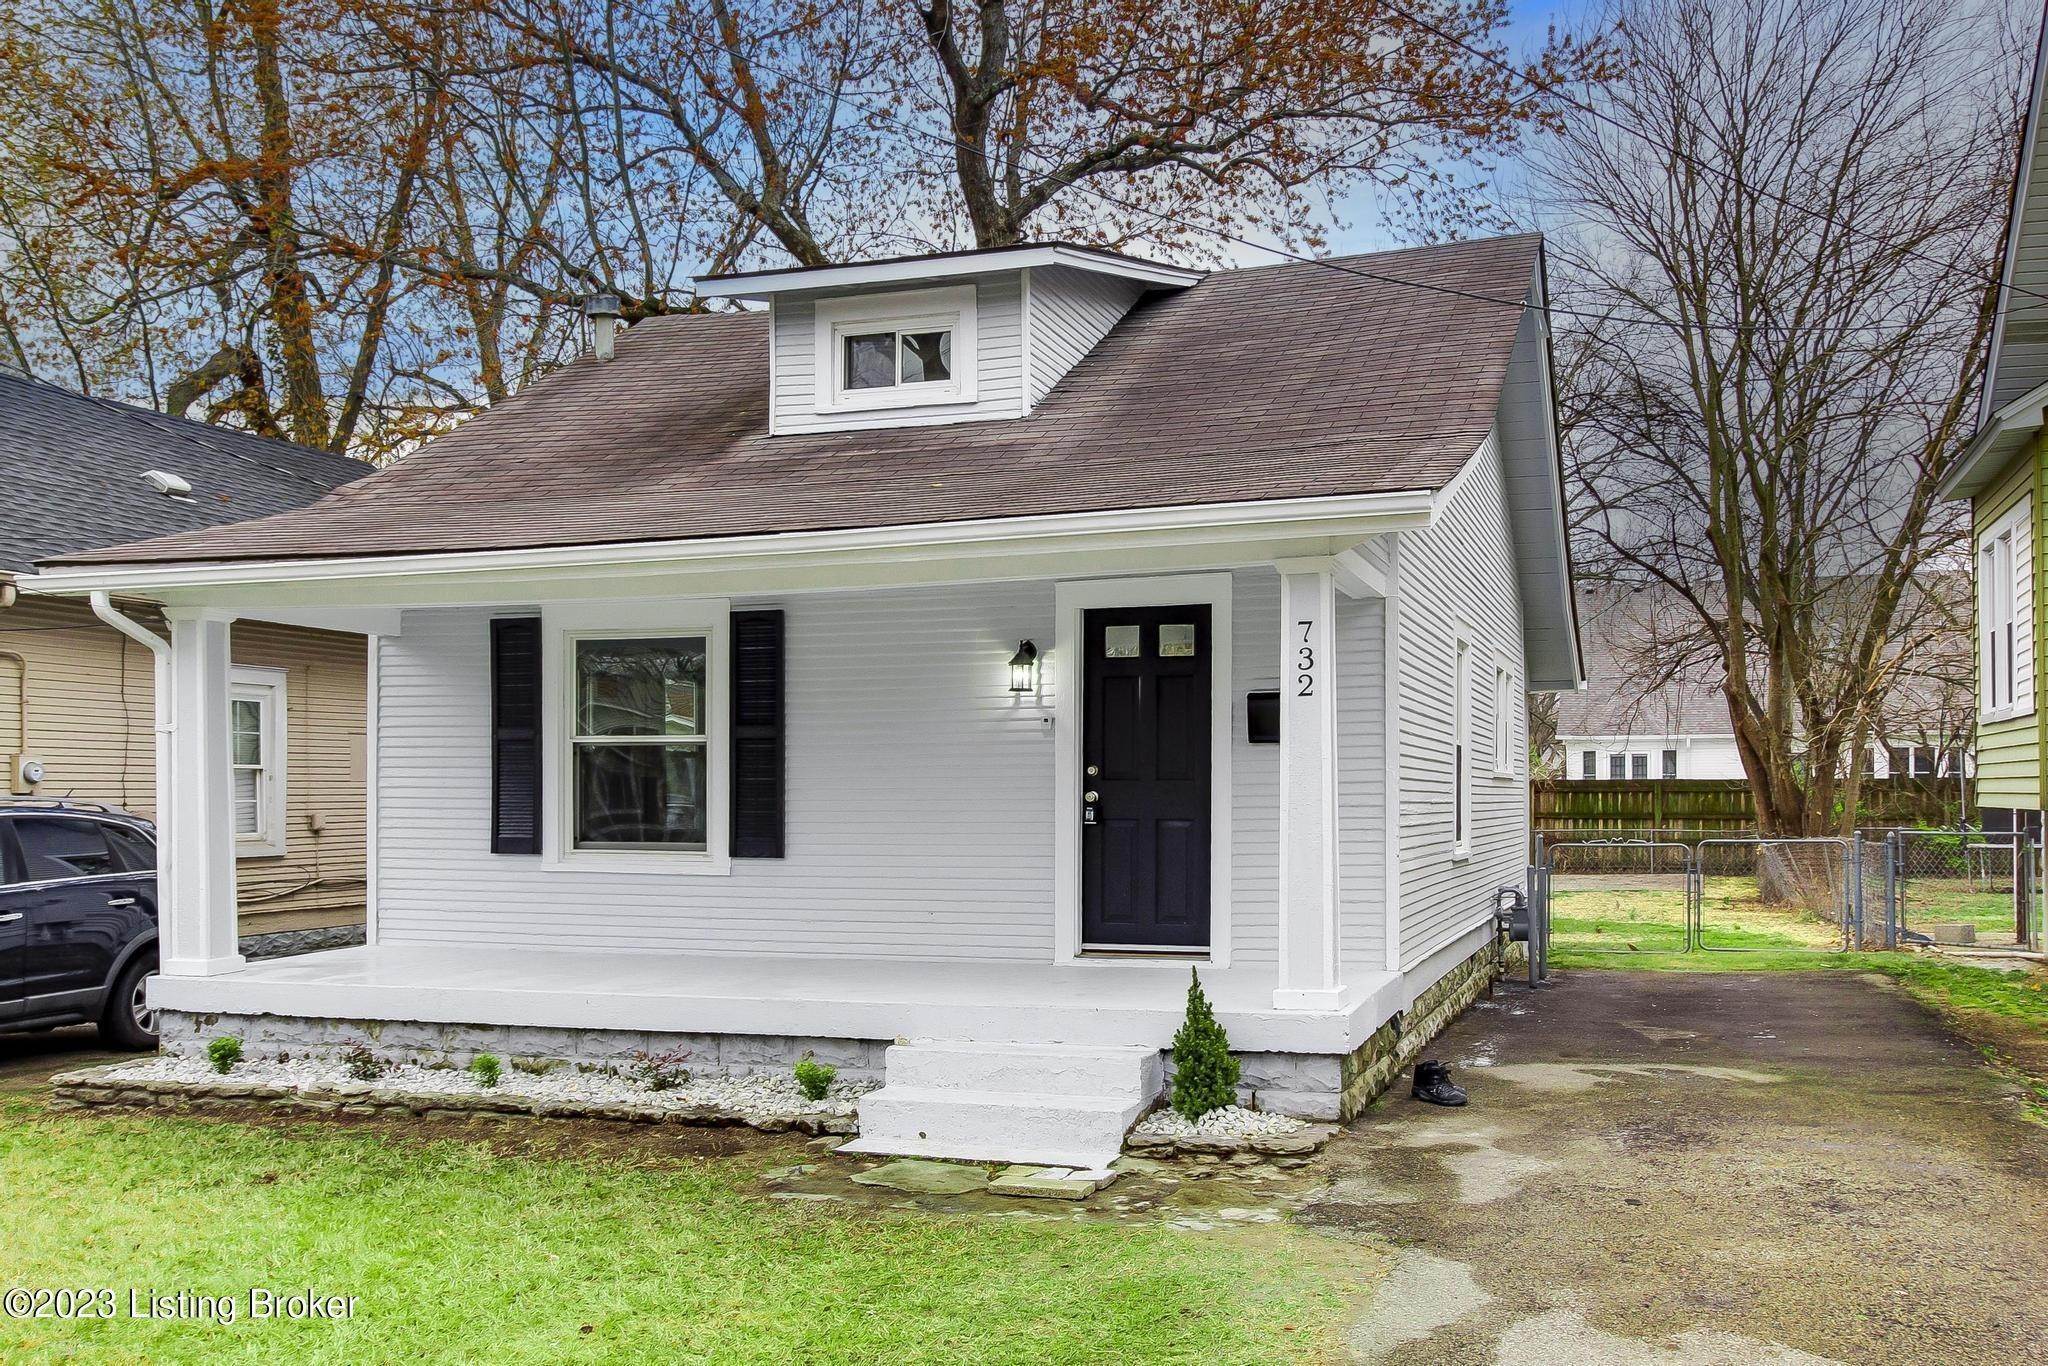 Single Family at Louisville, KY 40214